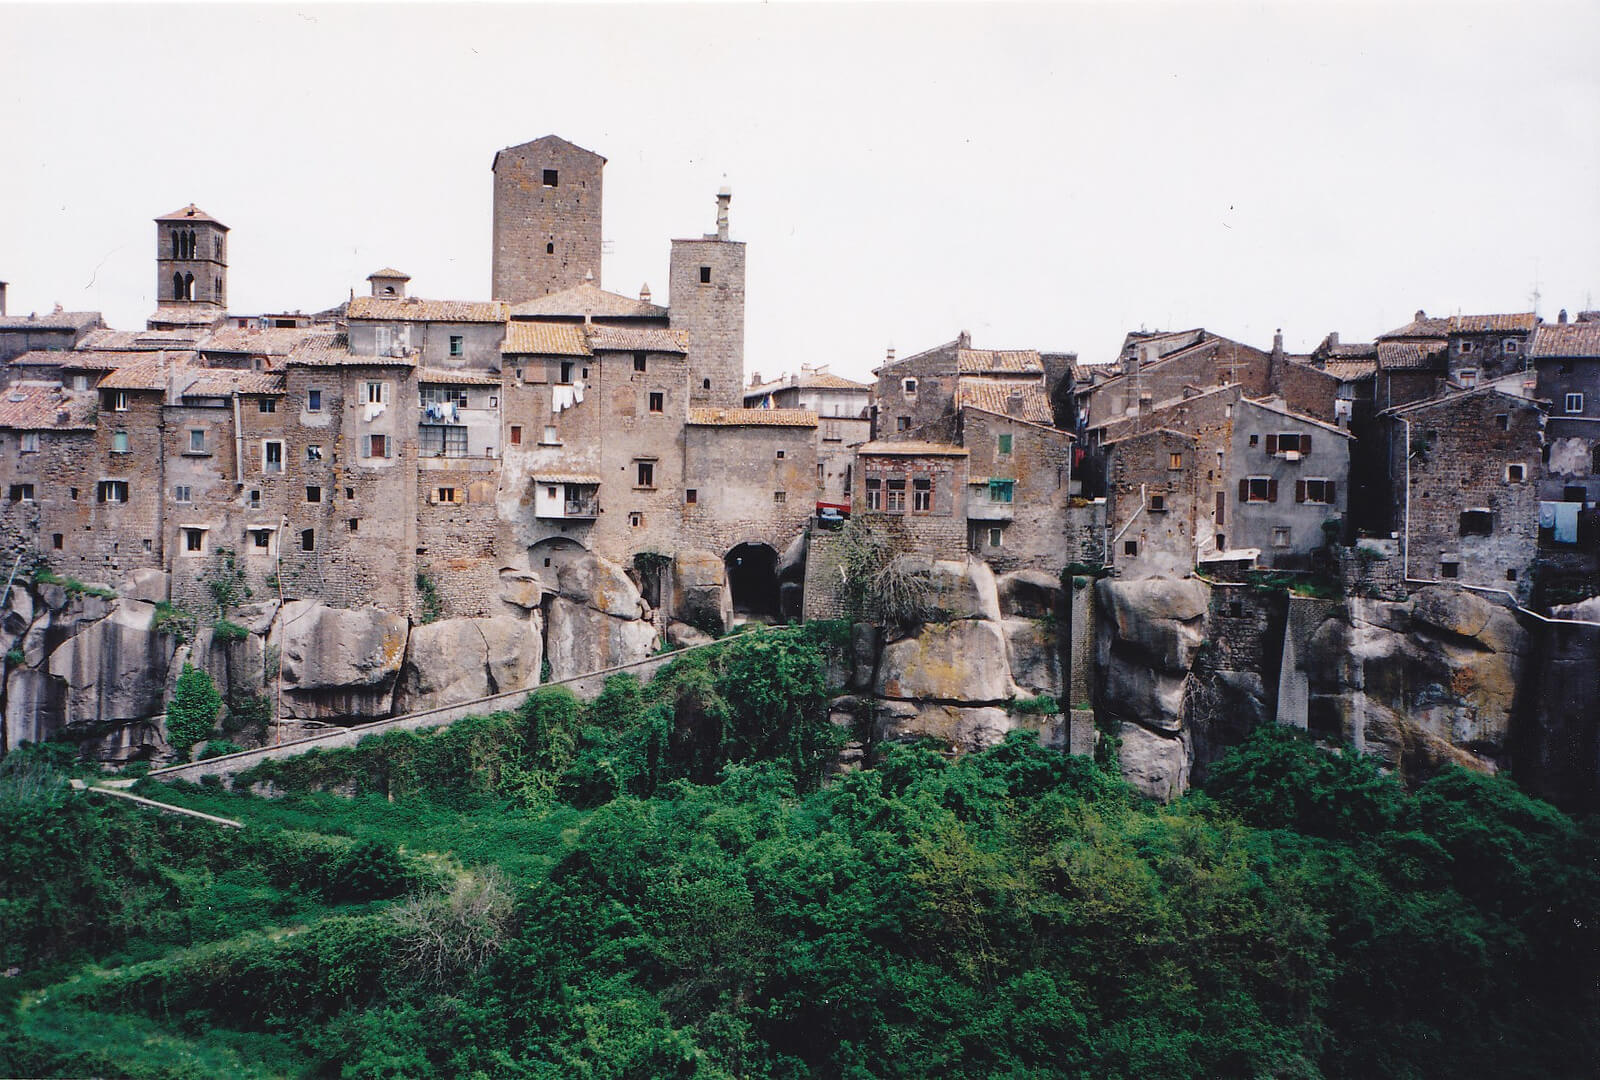 View on the ancient buildings of Vitorchiano